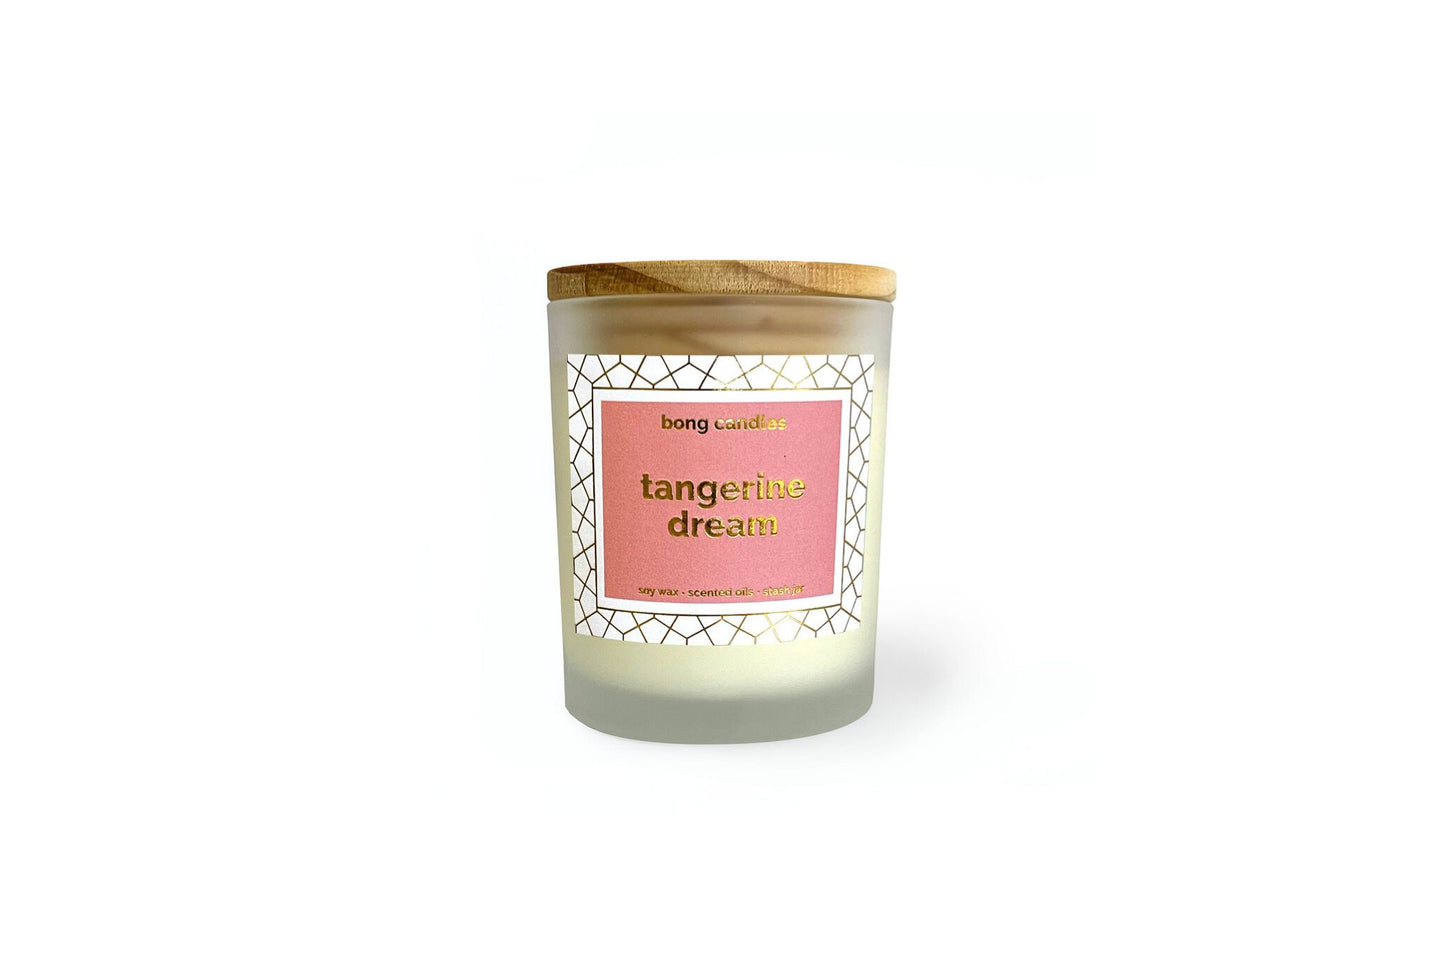 tangerine dream, candle, candle gift, stash jar candle